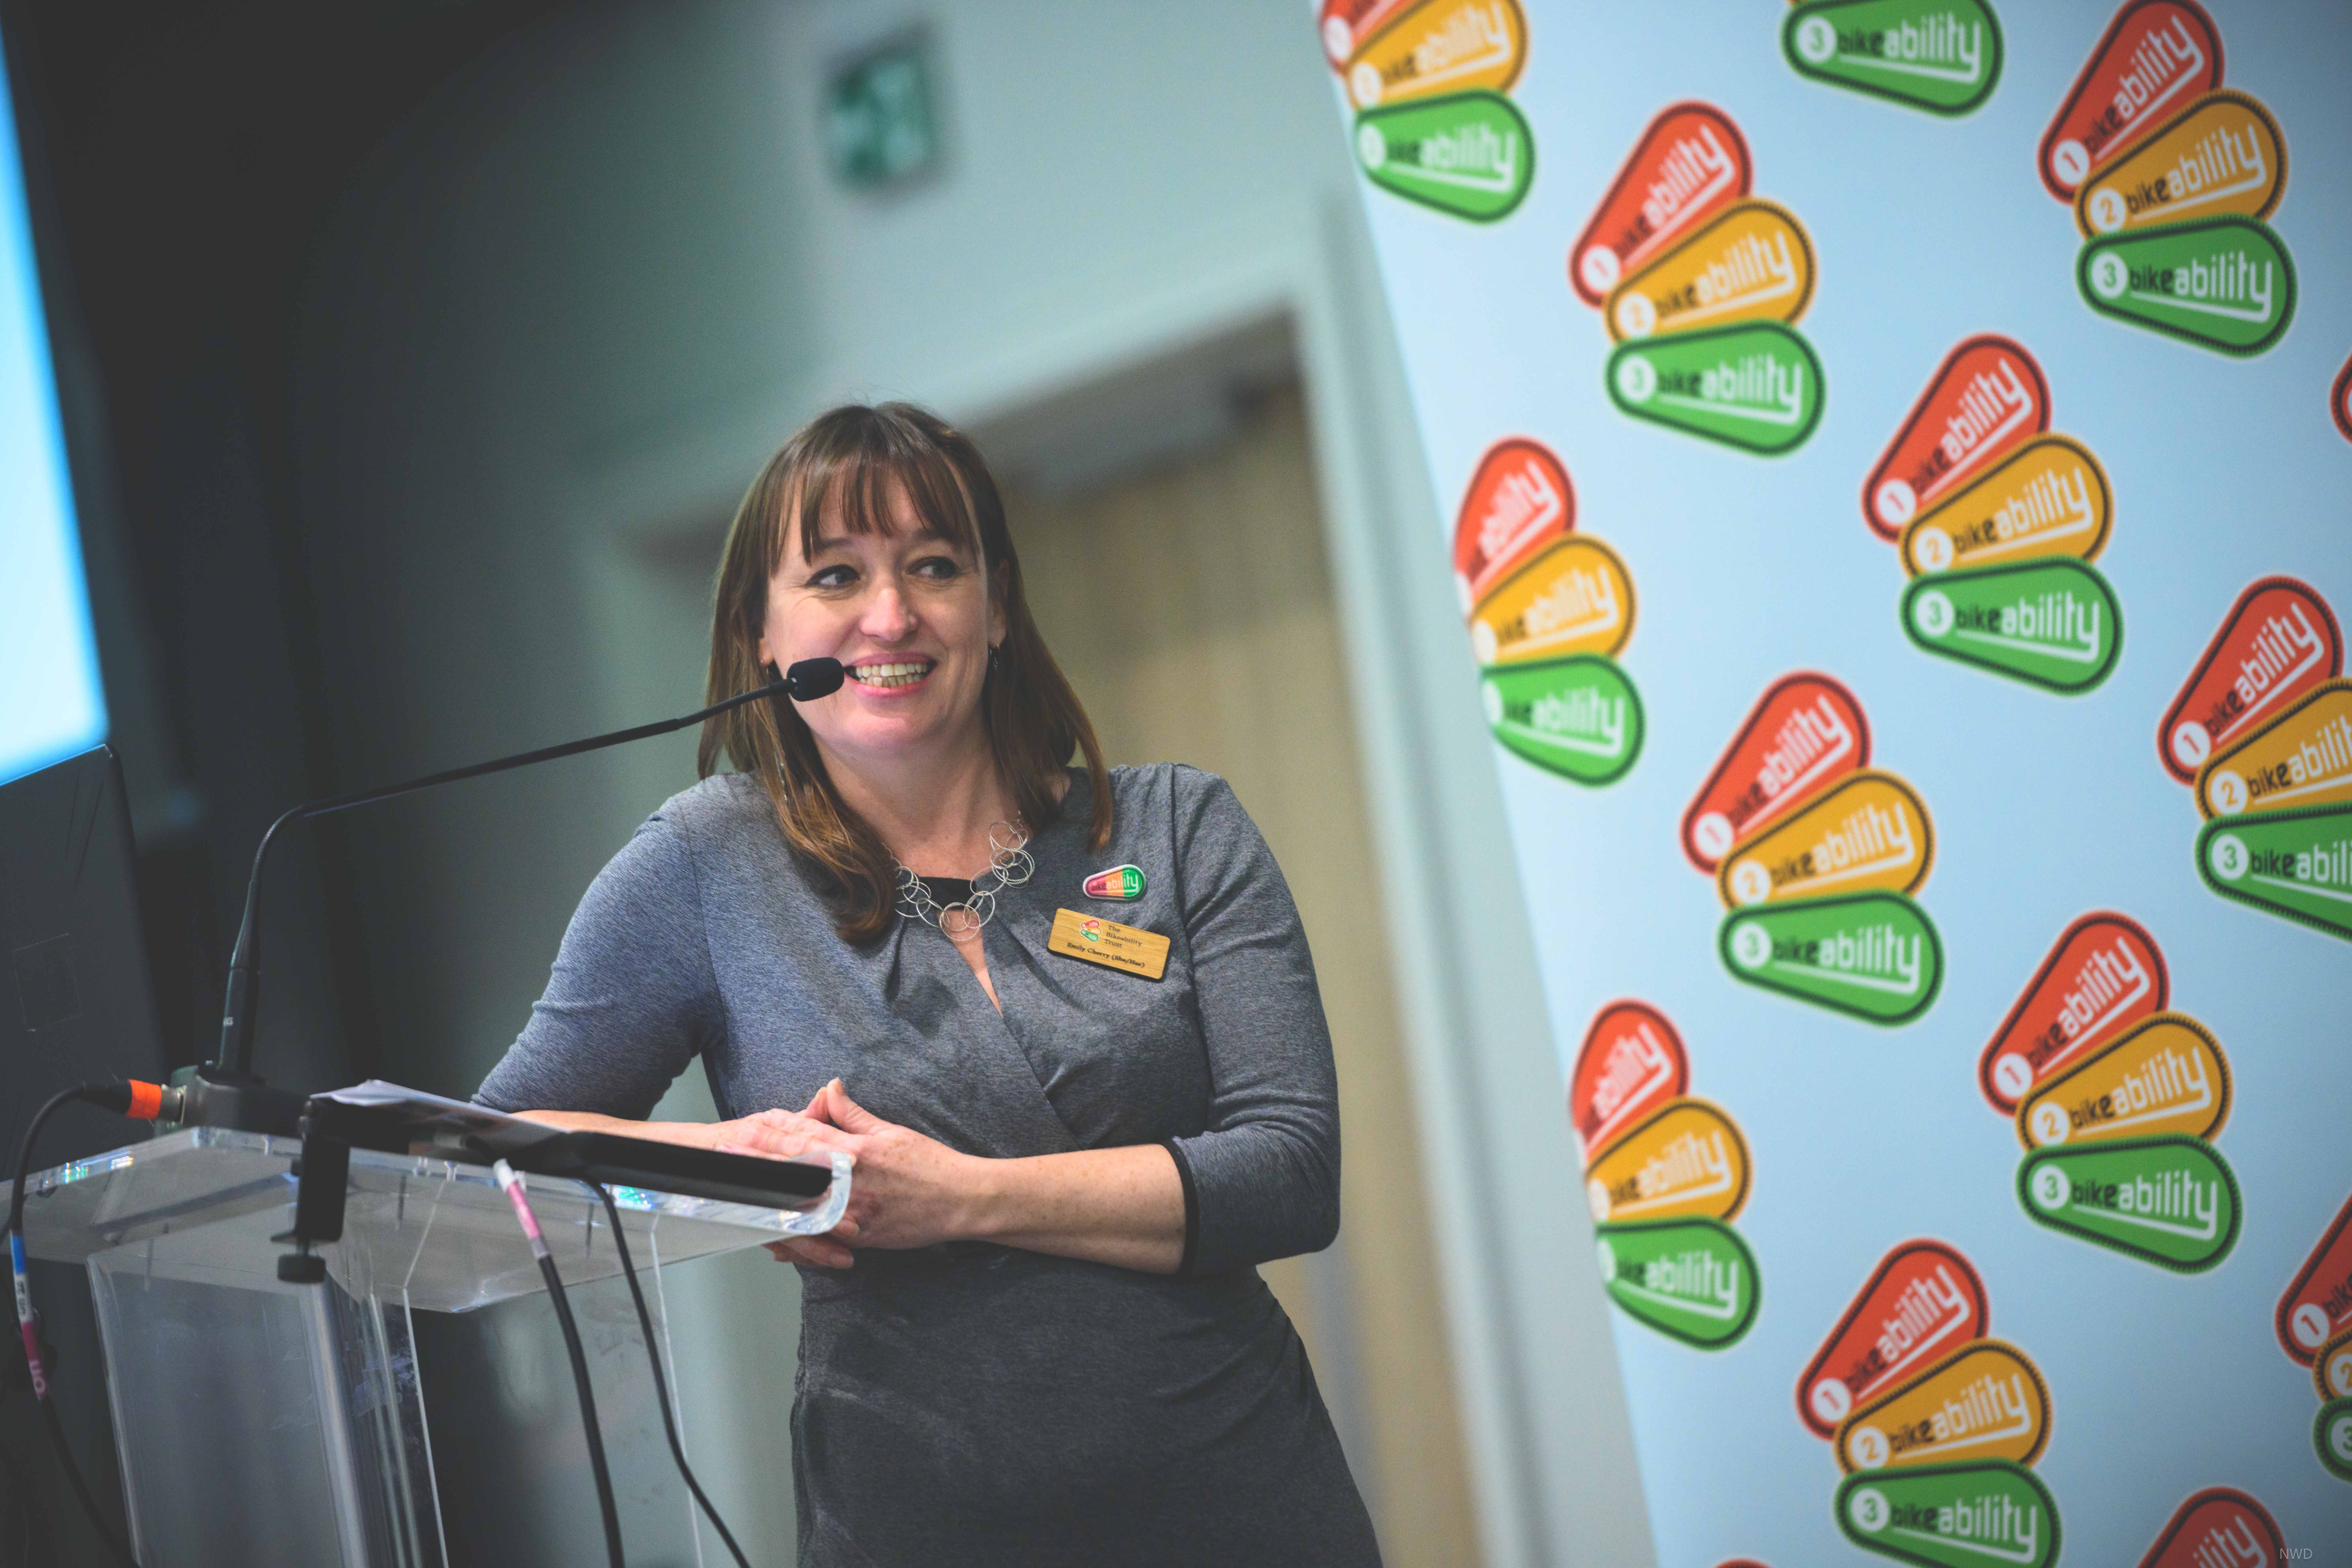 Relive the Bikeability Conference with Emily Cherry, CEO